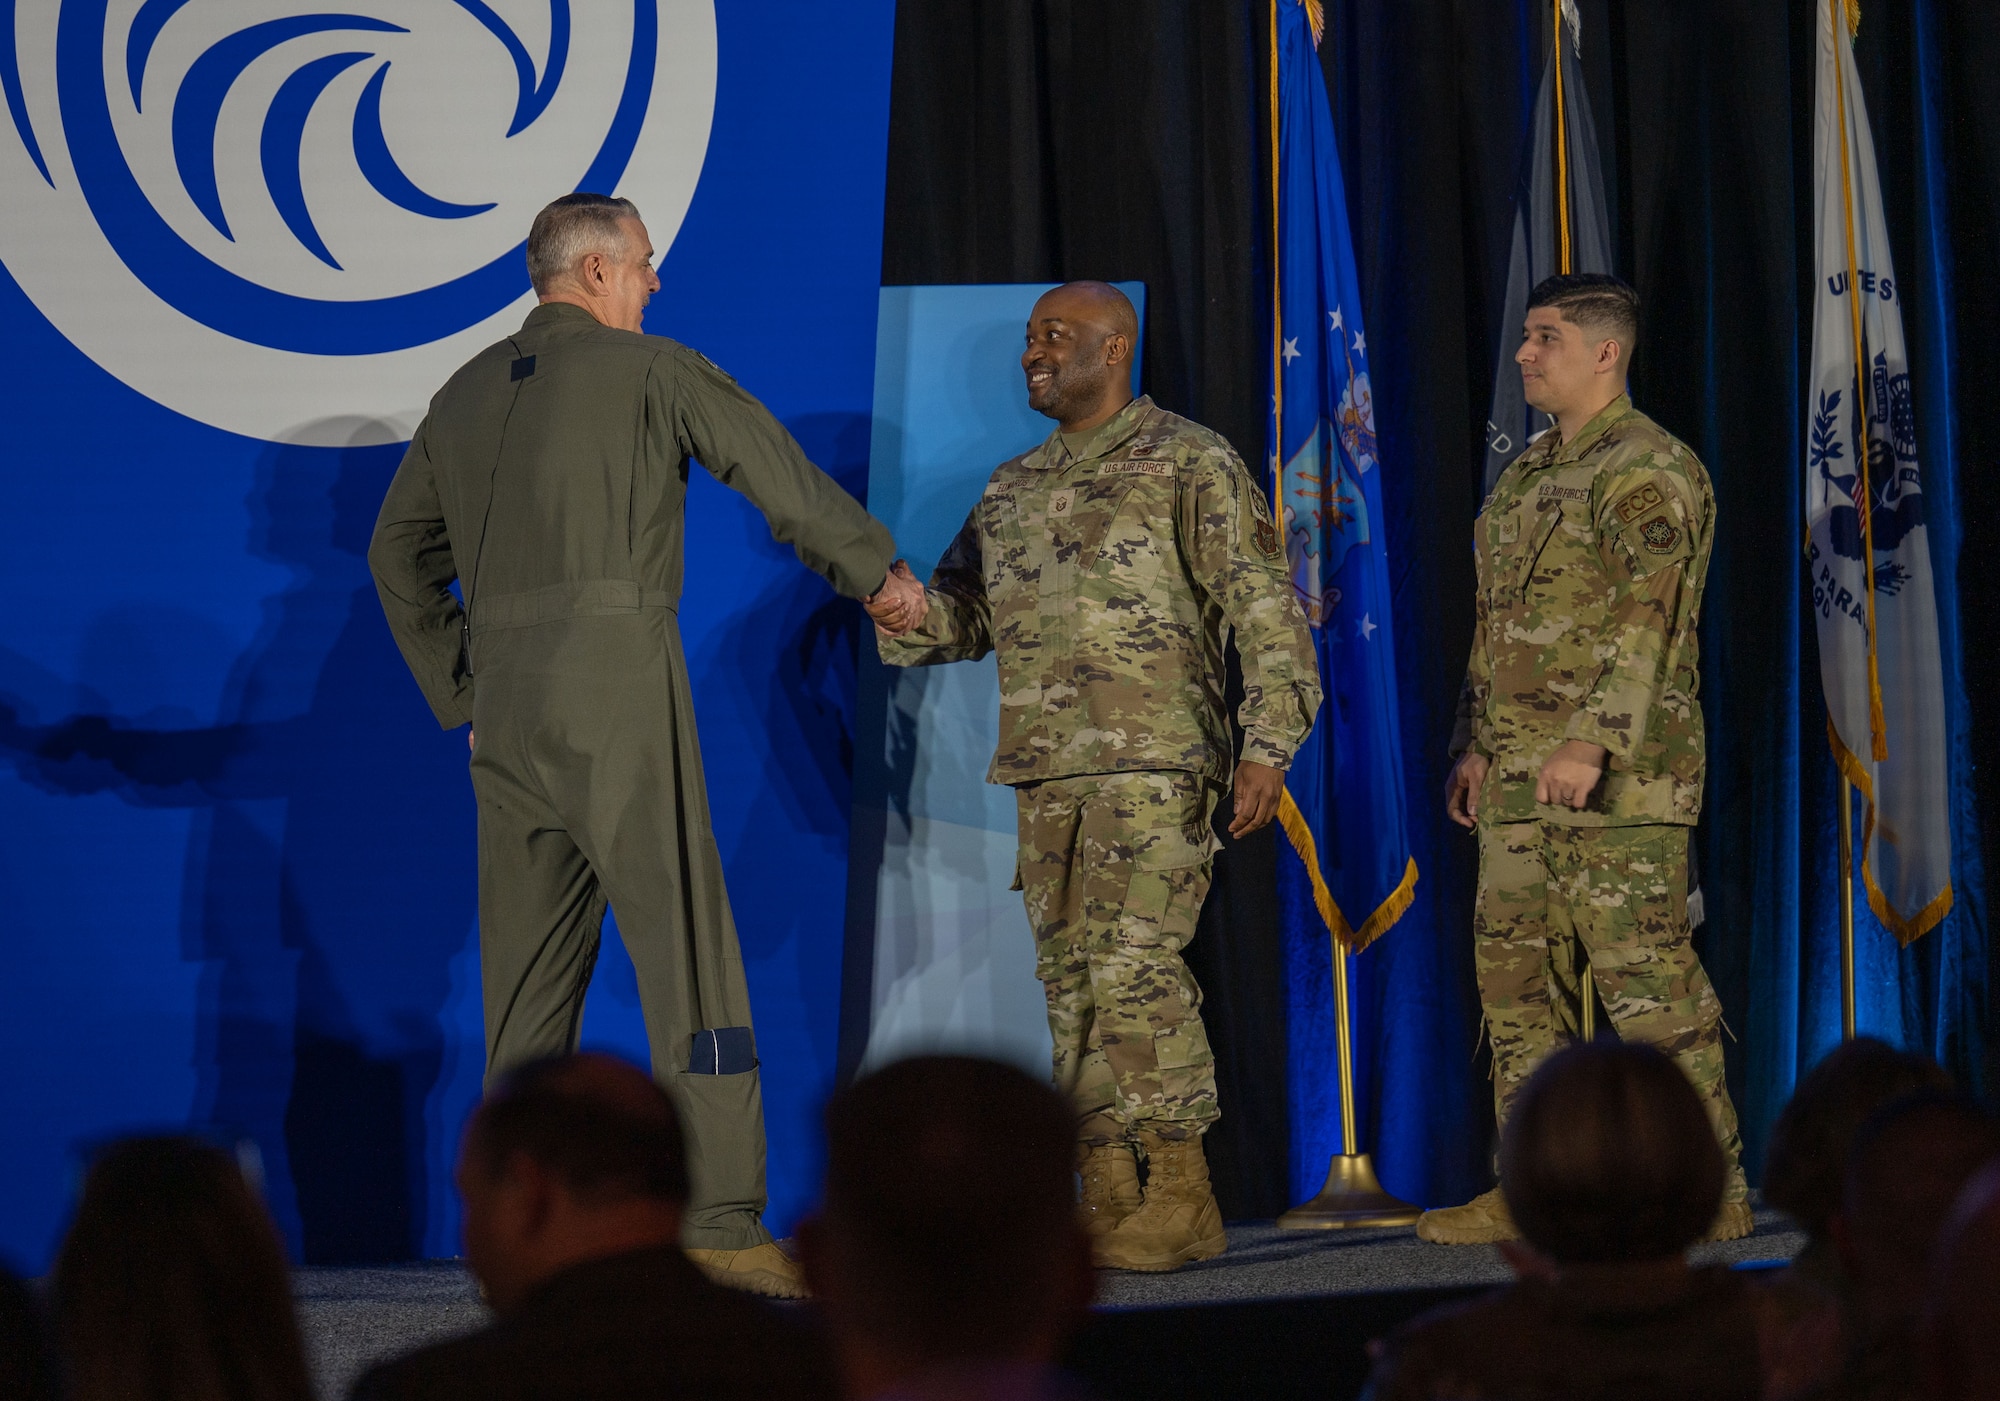 Gen. Mike Minihan, Commander of Air Mobility Command, presents MSgt Elrico Edwards from the 512 Airlift Wing with an Air Medal with Combat Device and SSgt Vincent Brooks from the 305 Maintenance Squadron with an Air Medal with Valor Device at the 2024 Logistics Officers Association Symposium. (U.S. Air Force photo by Air Mobility Command Public Affairs)